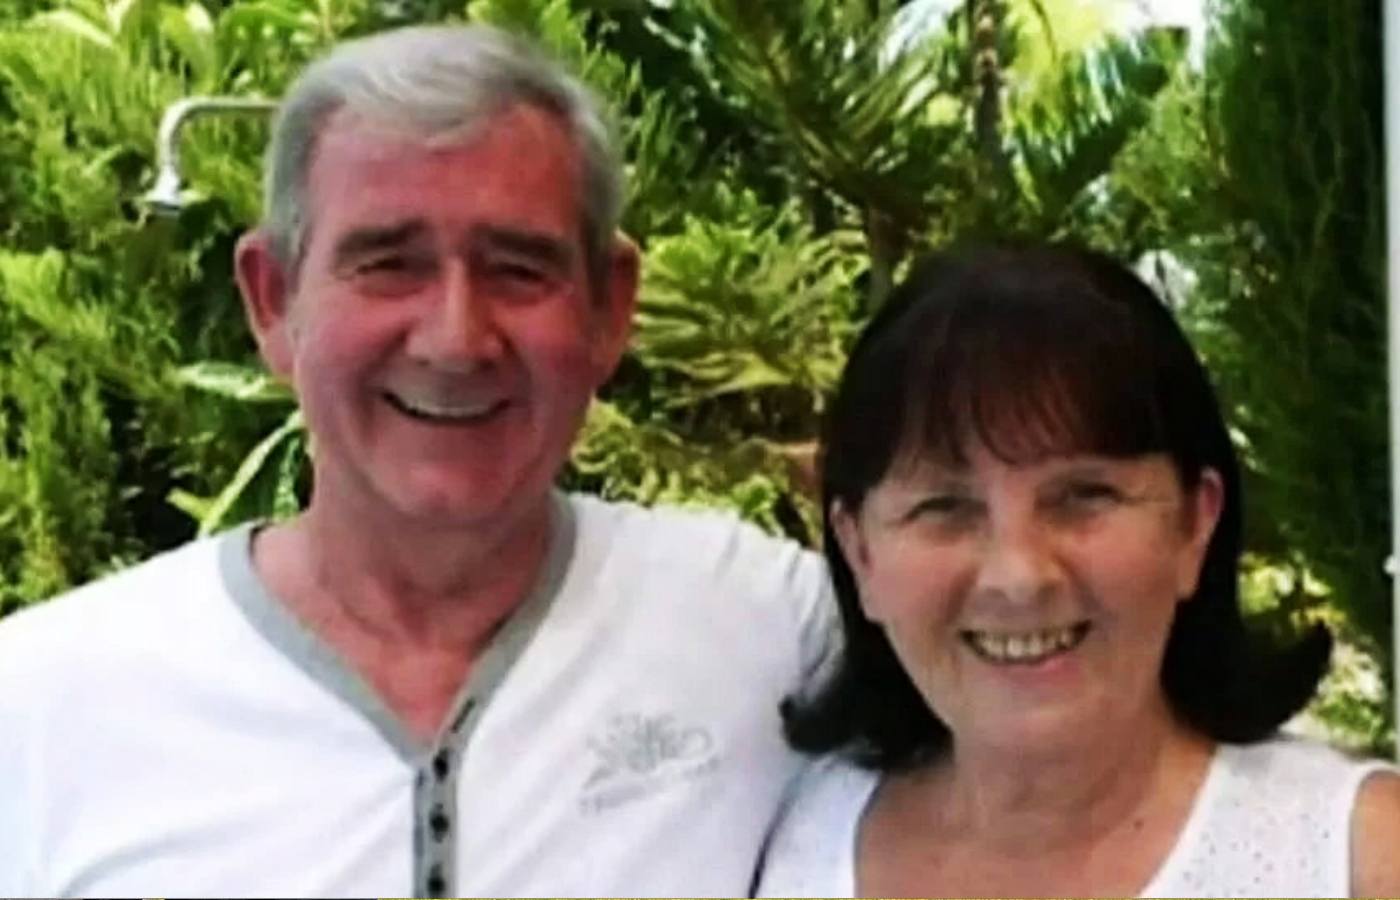 British expat David Hunter was released from custody in Cyprus last week after killing his seriously ill wife in 2021.